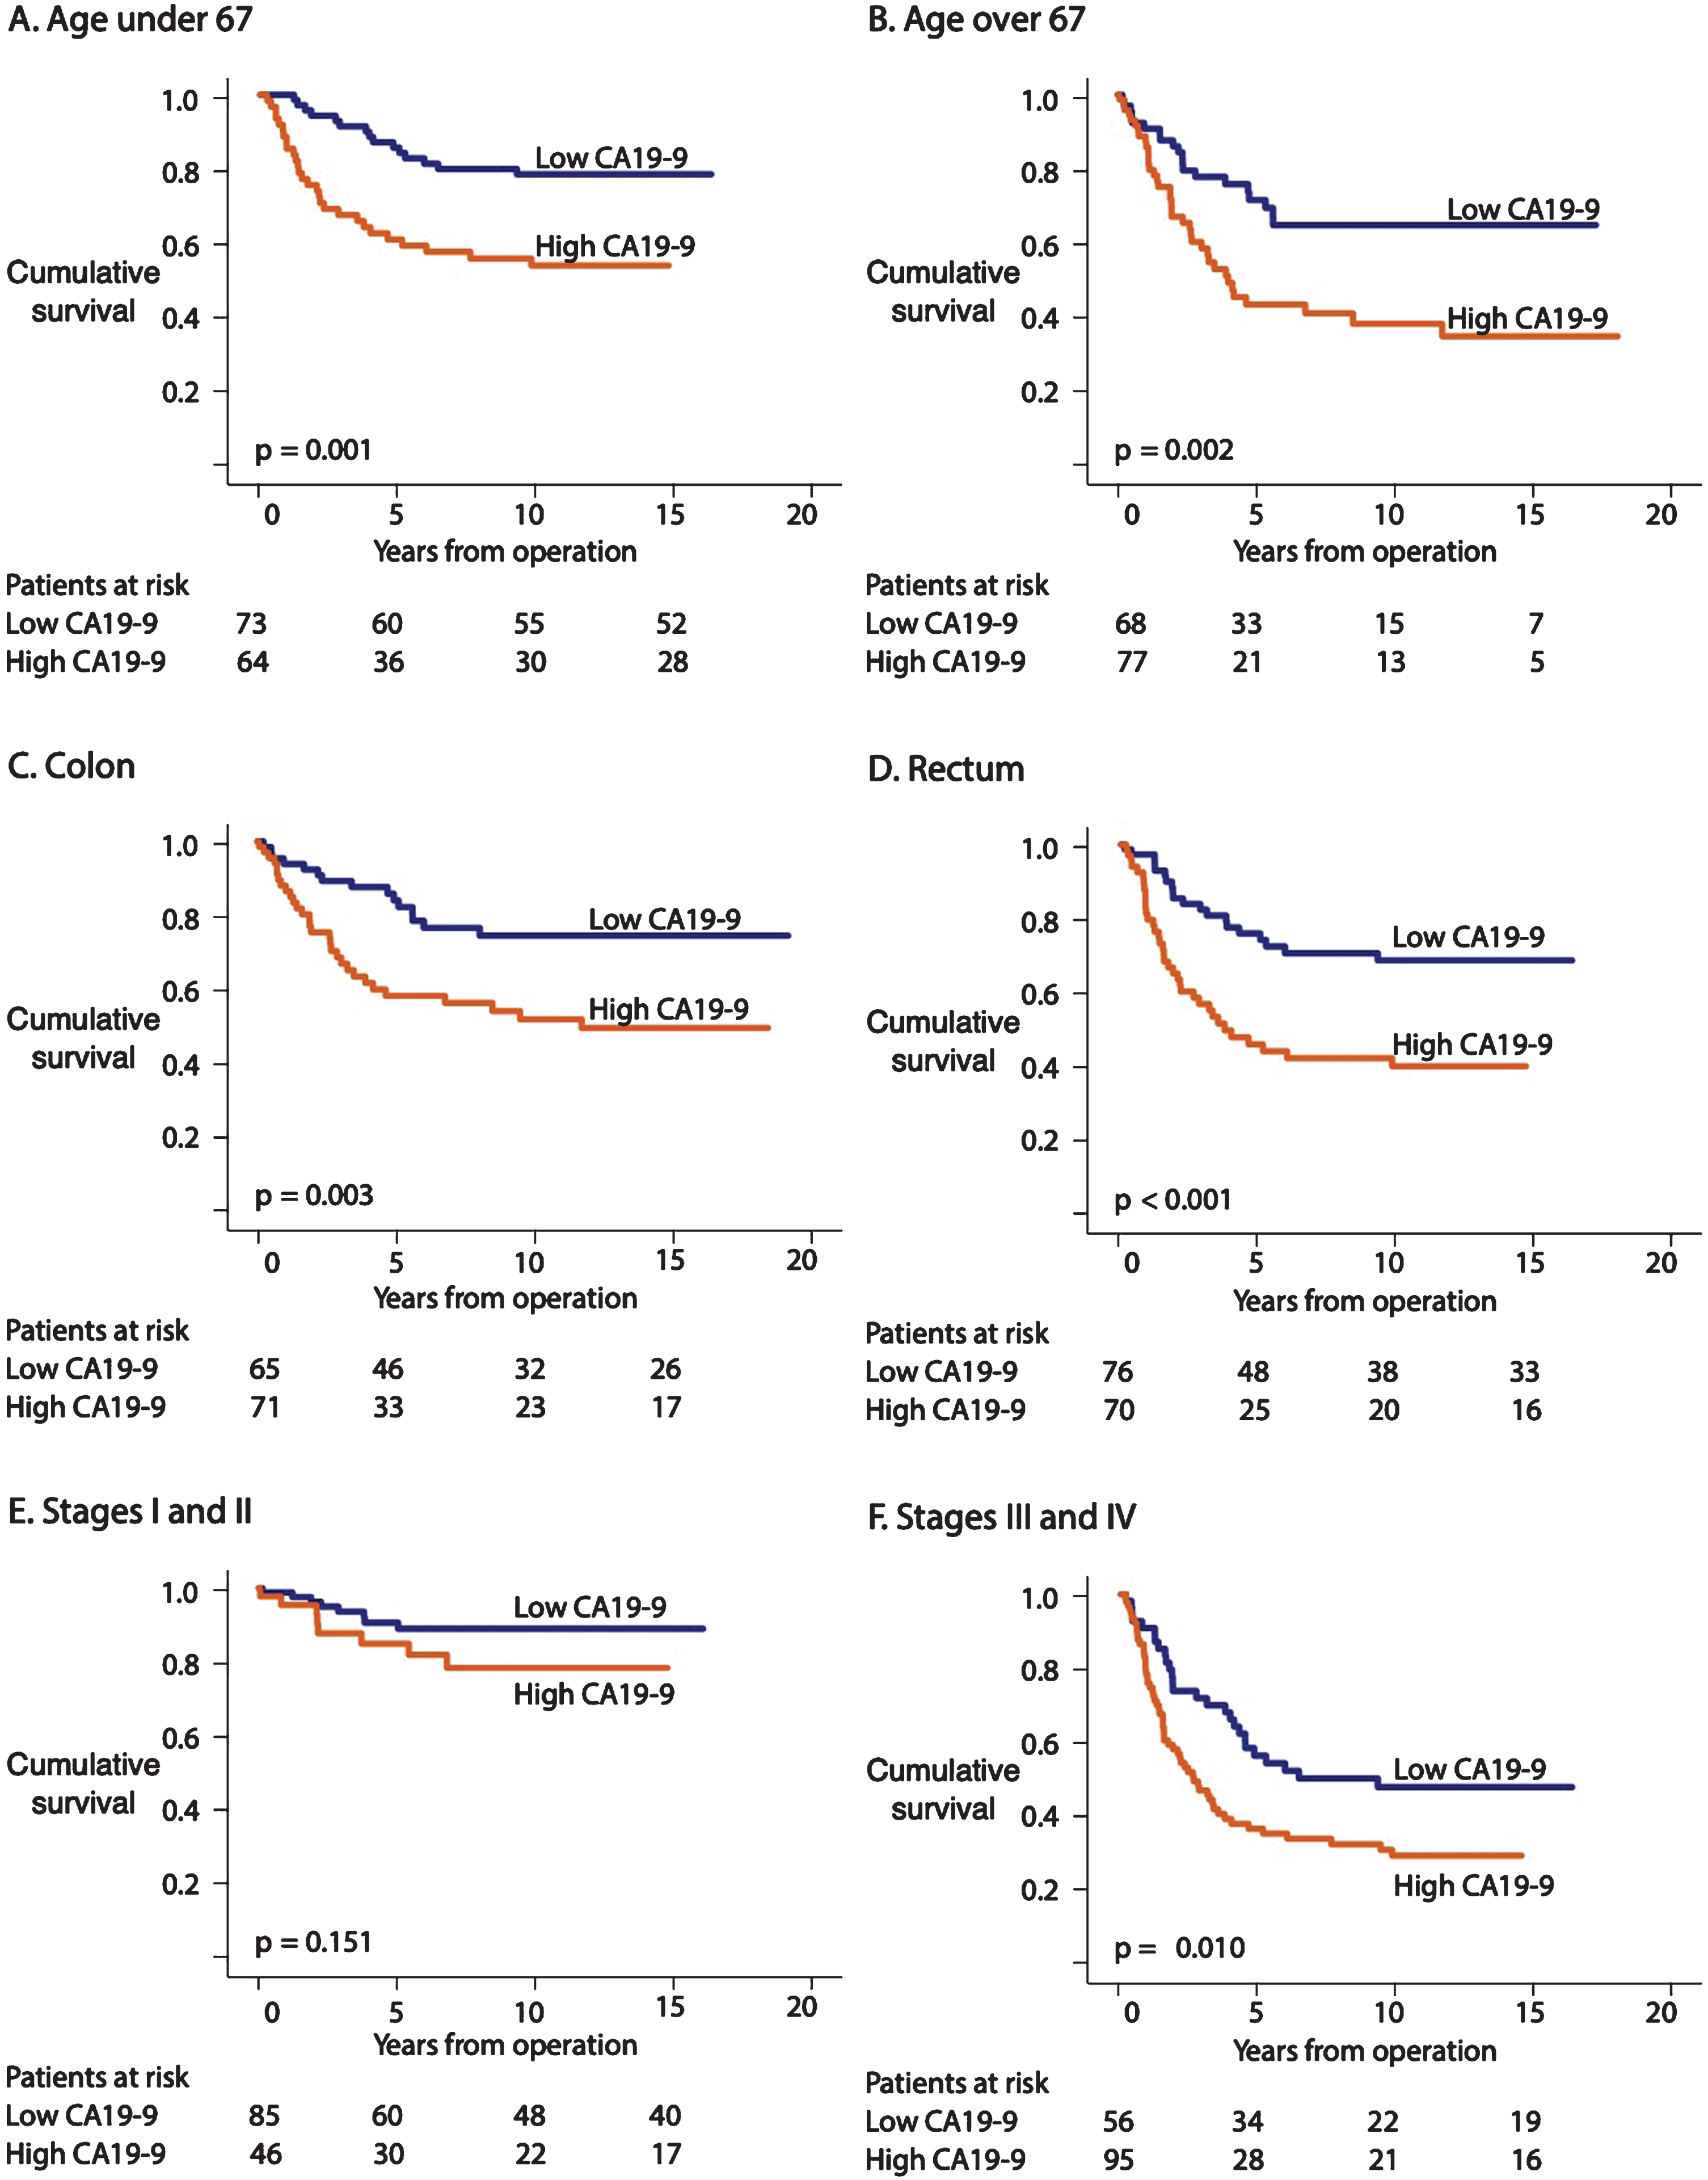 Disease-specific survival (DSS) according to the Kaplan-Meier log-rank test of CA19-9 subgroups. The cohort was dichotomized based on the CA19-9 median. (A) CA19-9 levels for patients <67 and (B) ≥67 years old. (C) CA19-9 levels for colon cancer and (D) rectum cancer. (E) CA19-9 levels for stages I–II and (F) stages III–IV.